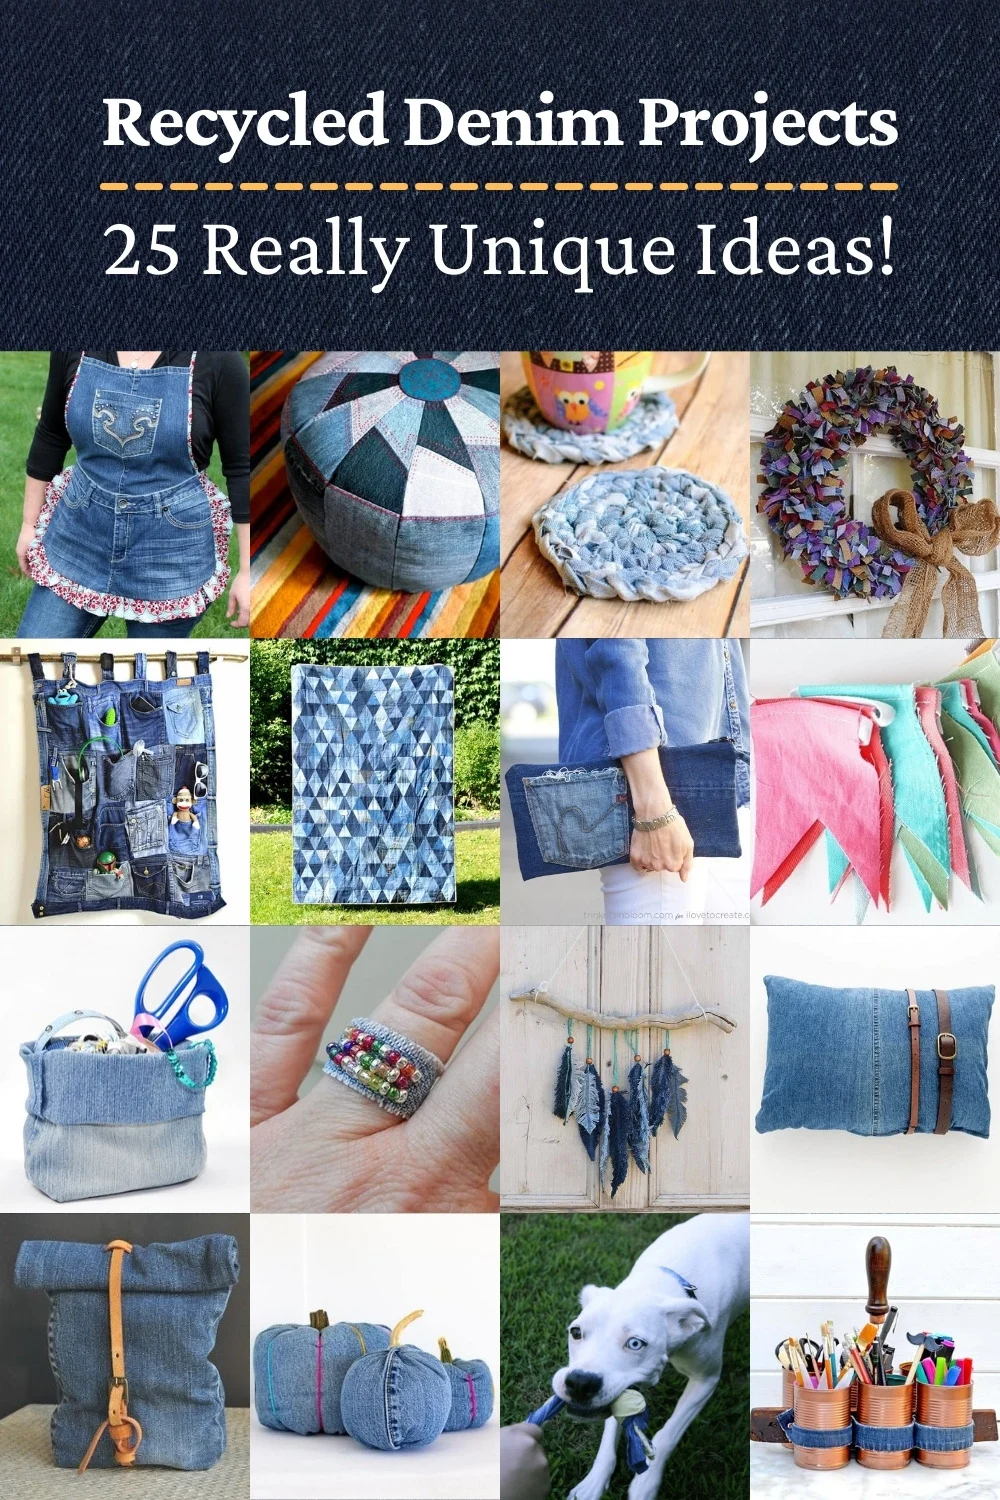 DIY Denim bags from old jeans: 3 easy to make ideas - Sew Guide